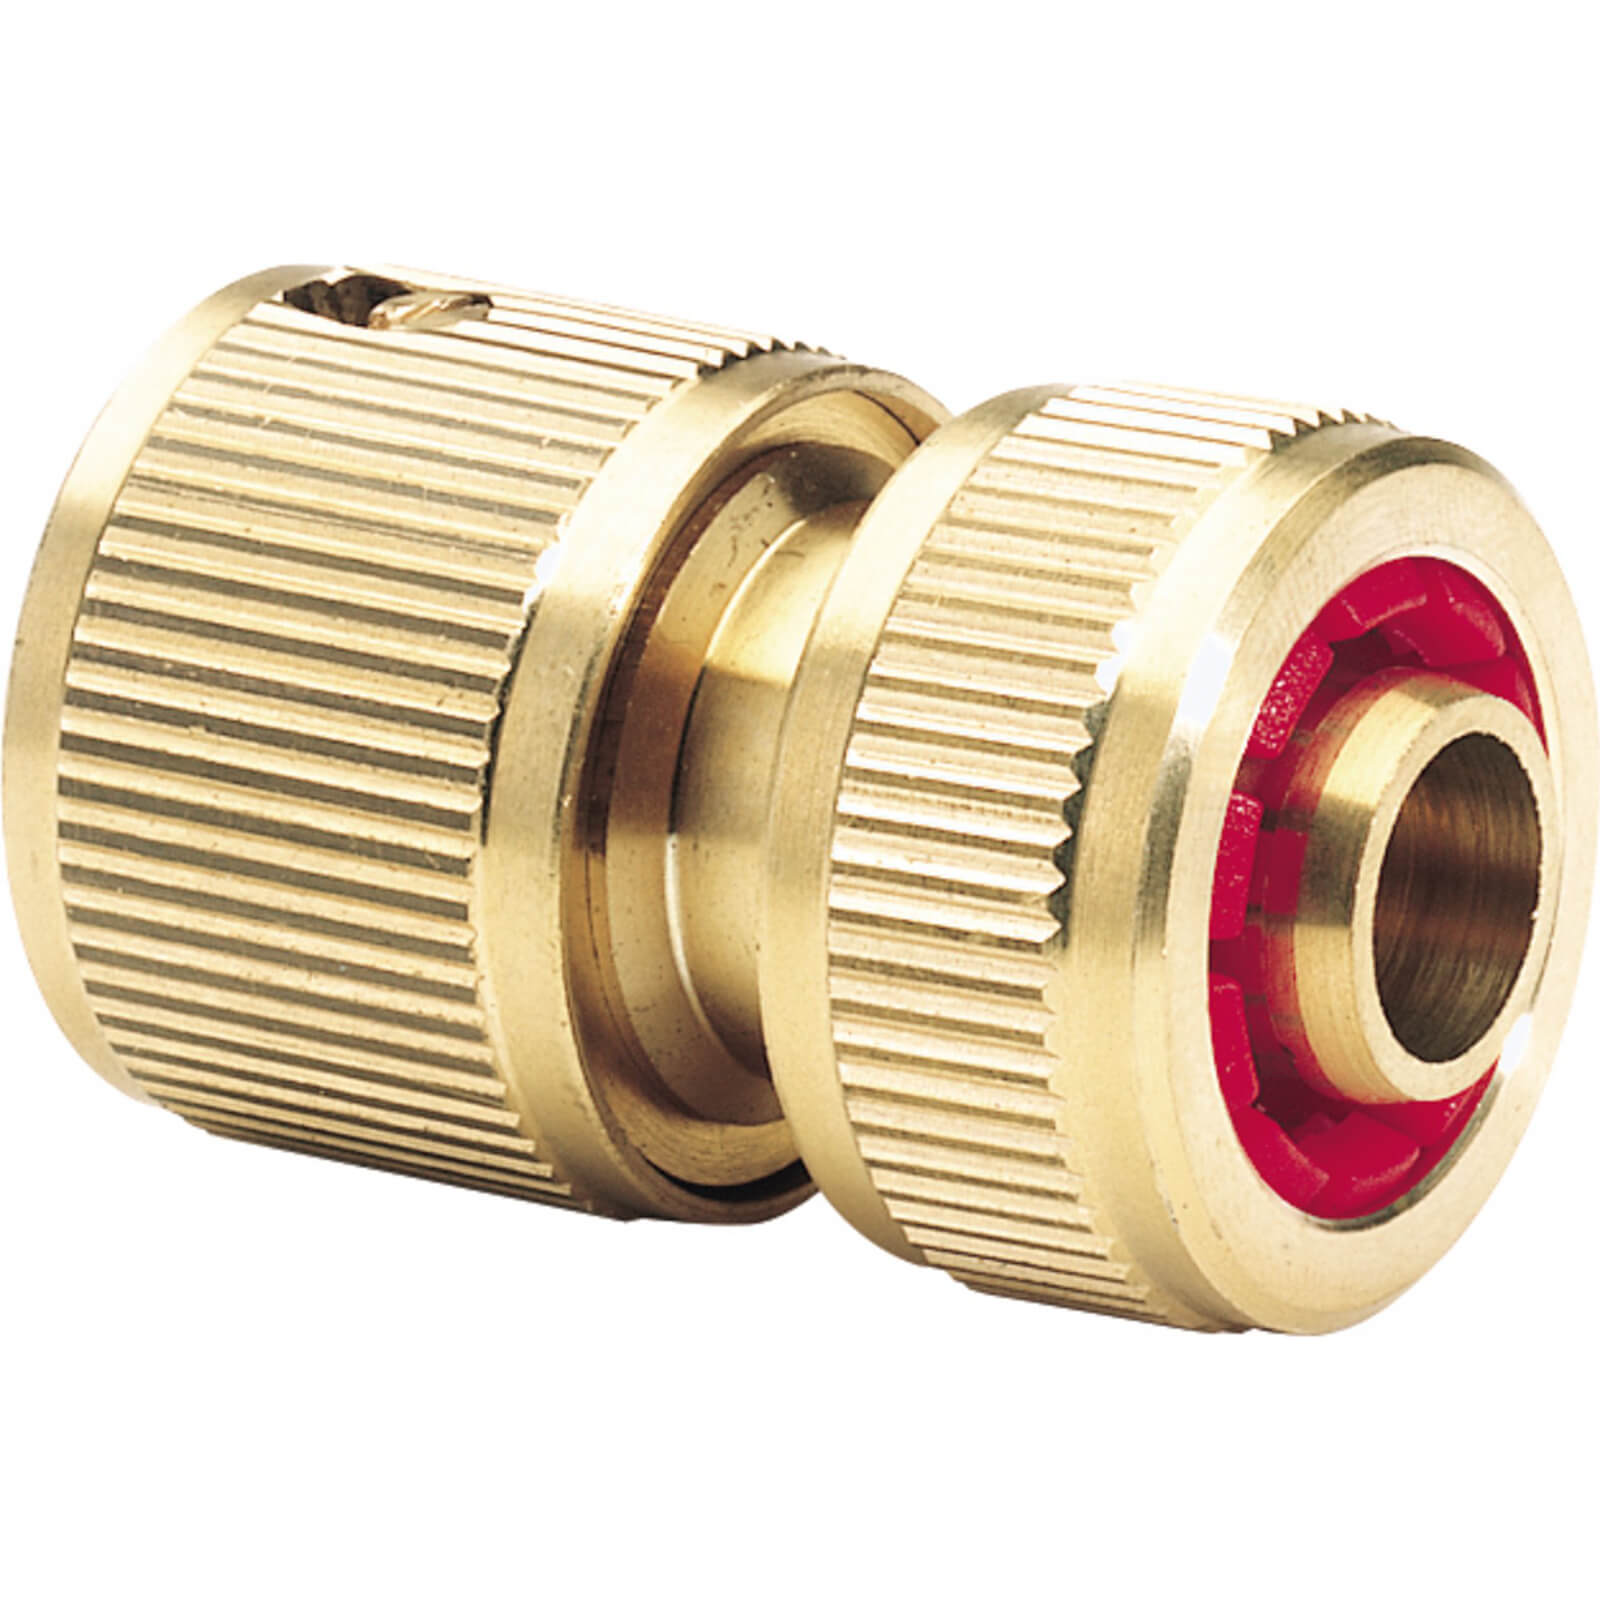 Image of Draper Expert Brass Waterstop Hose Pipe Connector 1/2" / 12.5mm Pack of 1